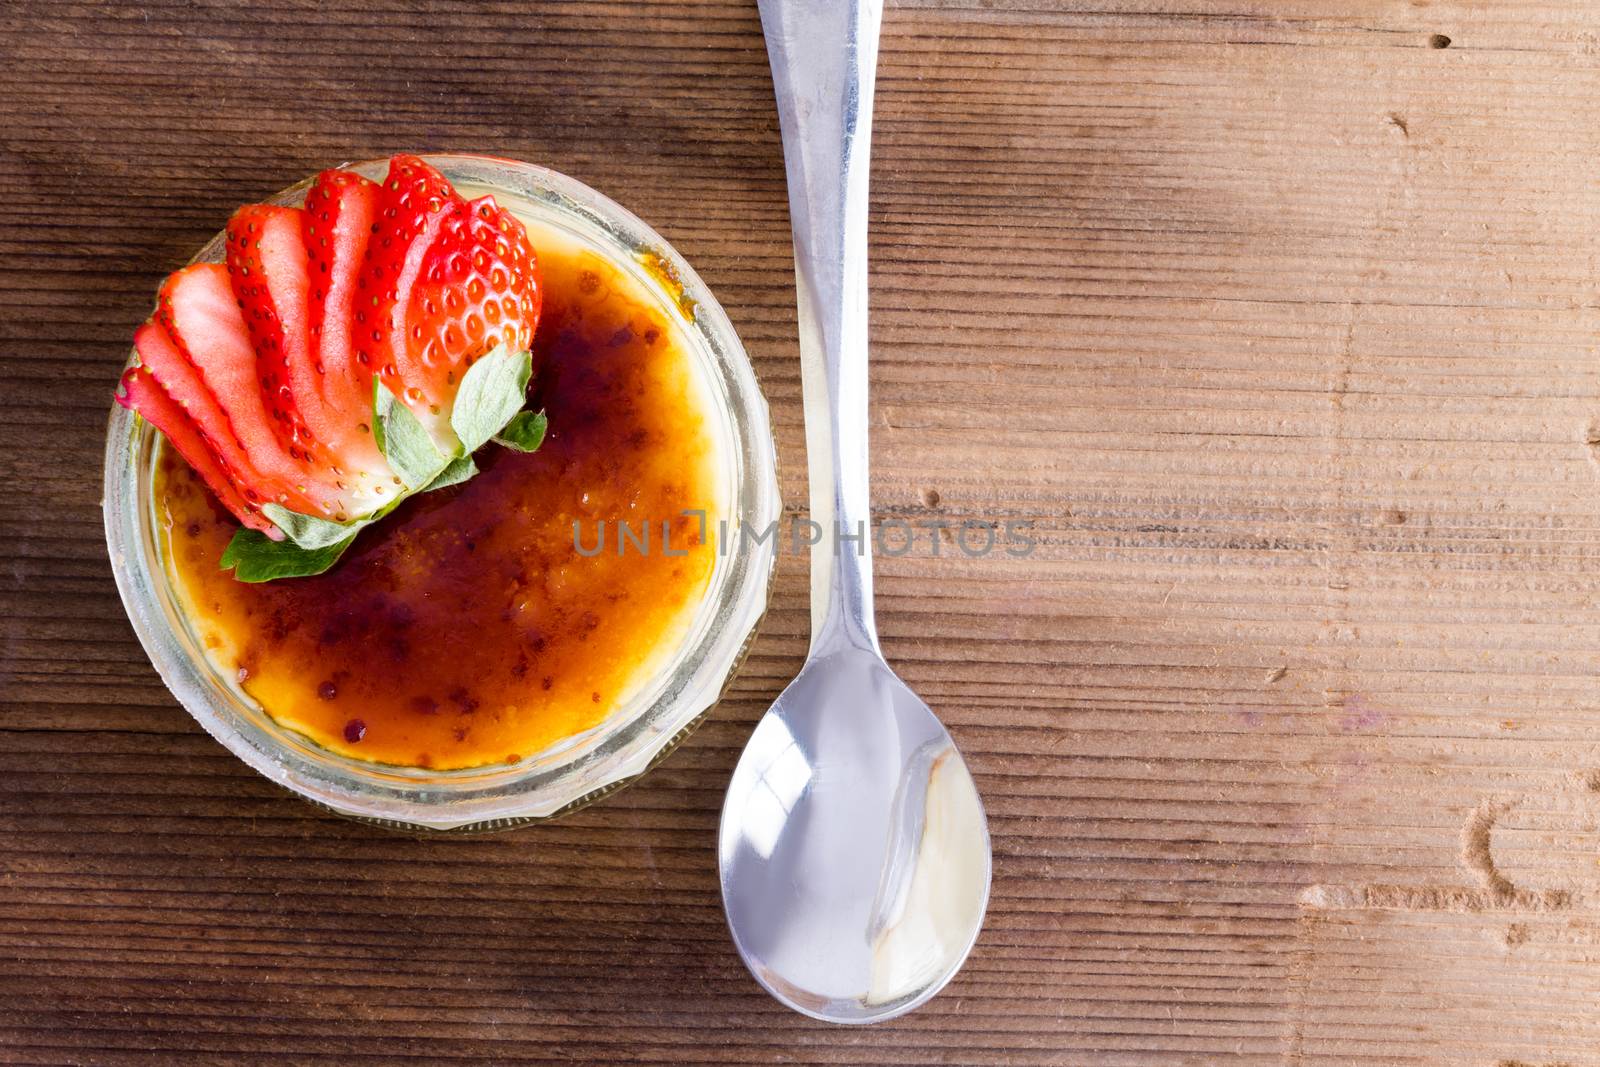 Appetizing custard dessert topped with sliced strawberry from above angle with spoon over wood background